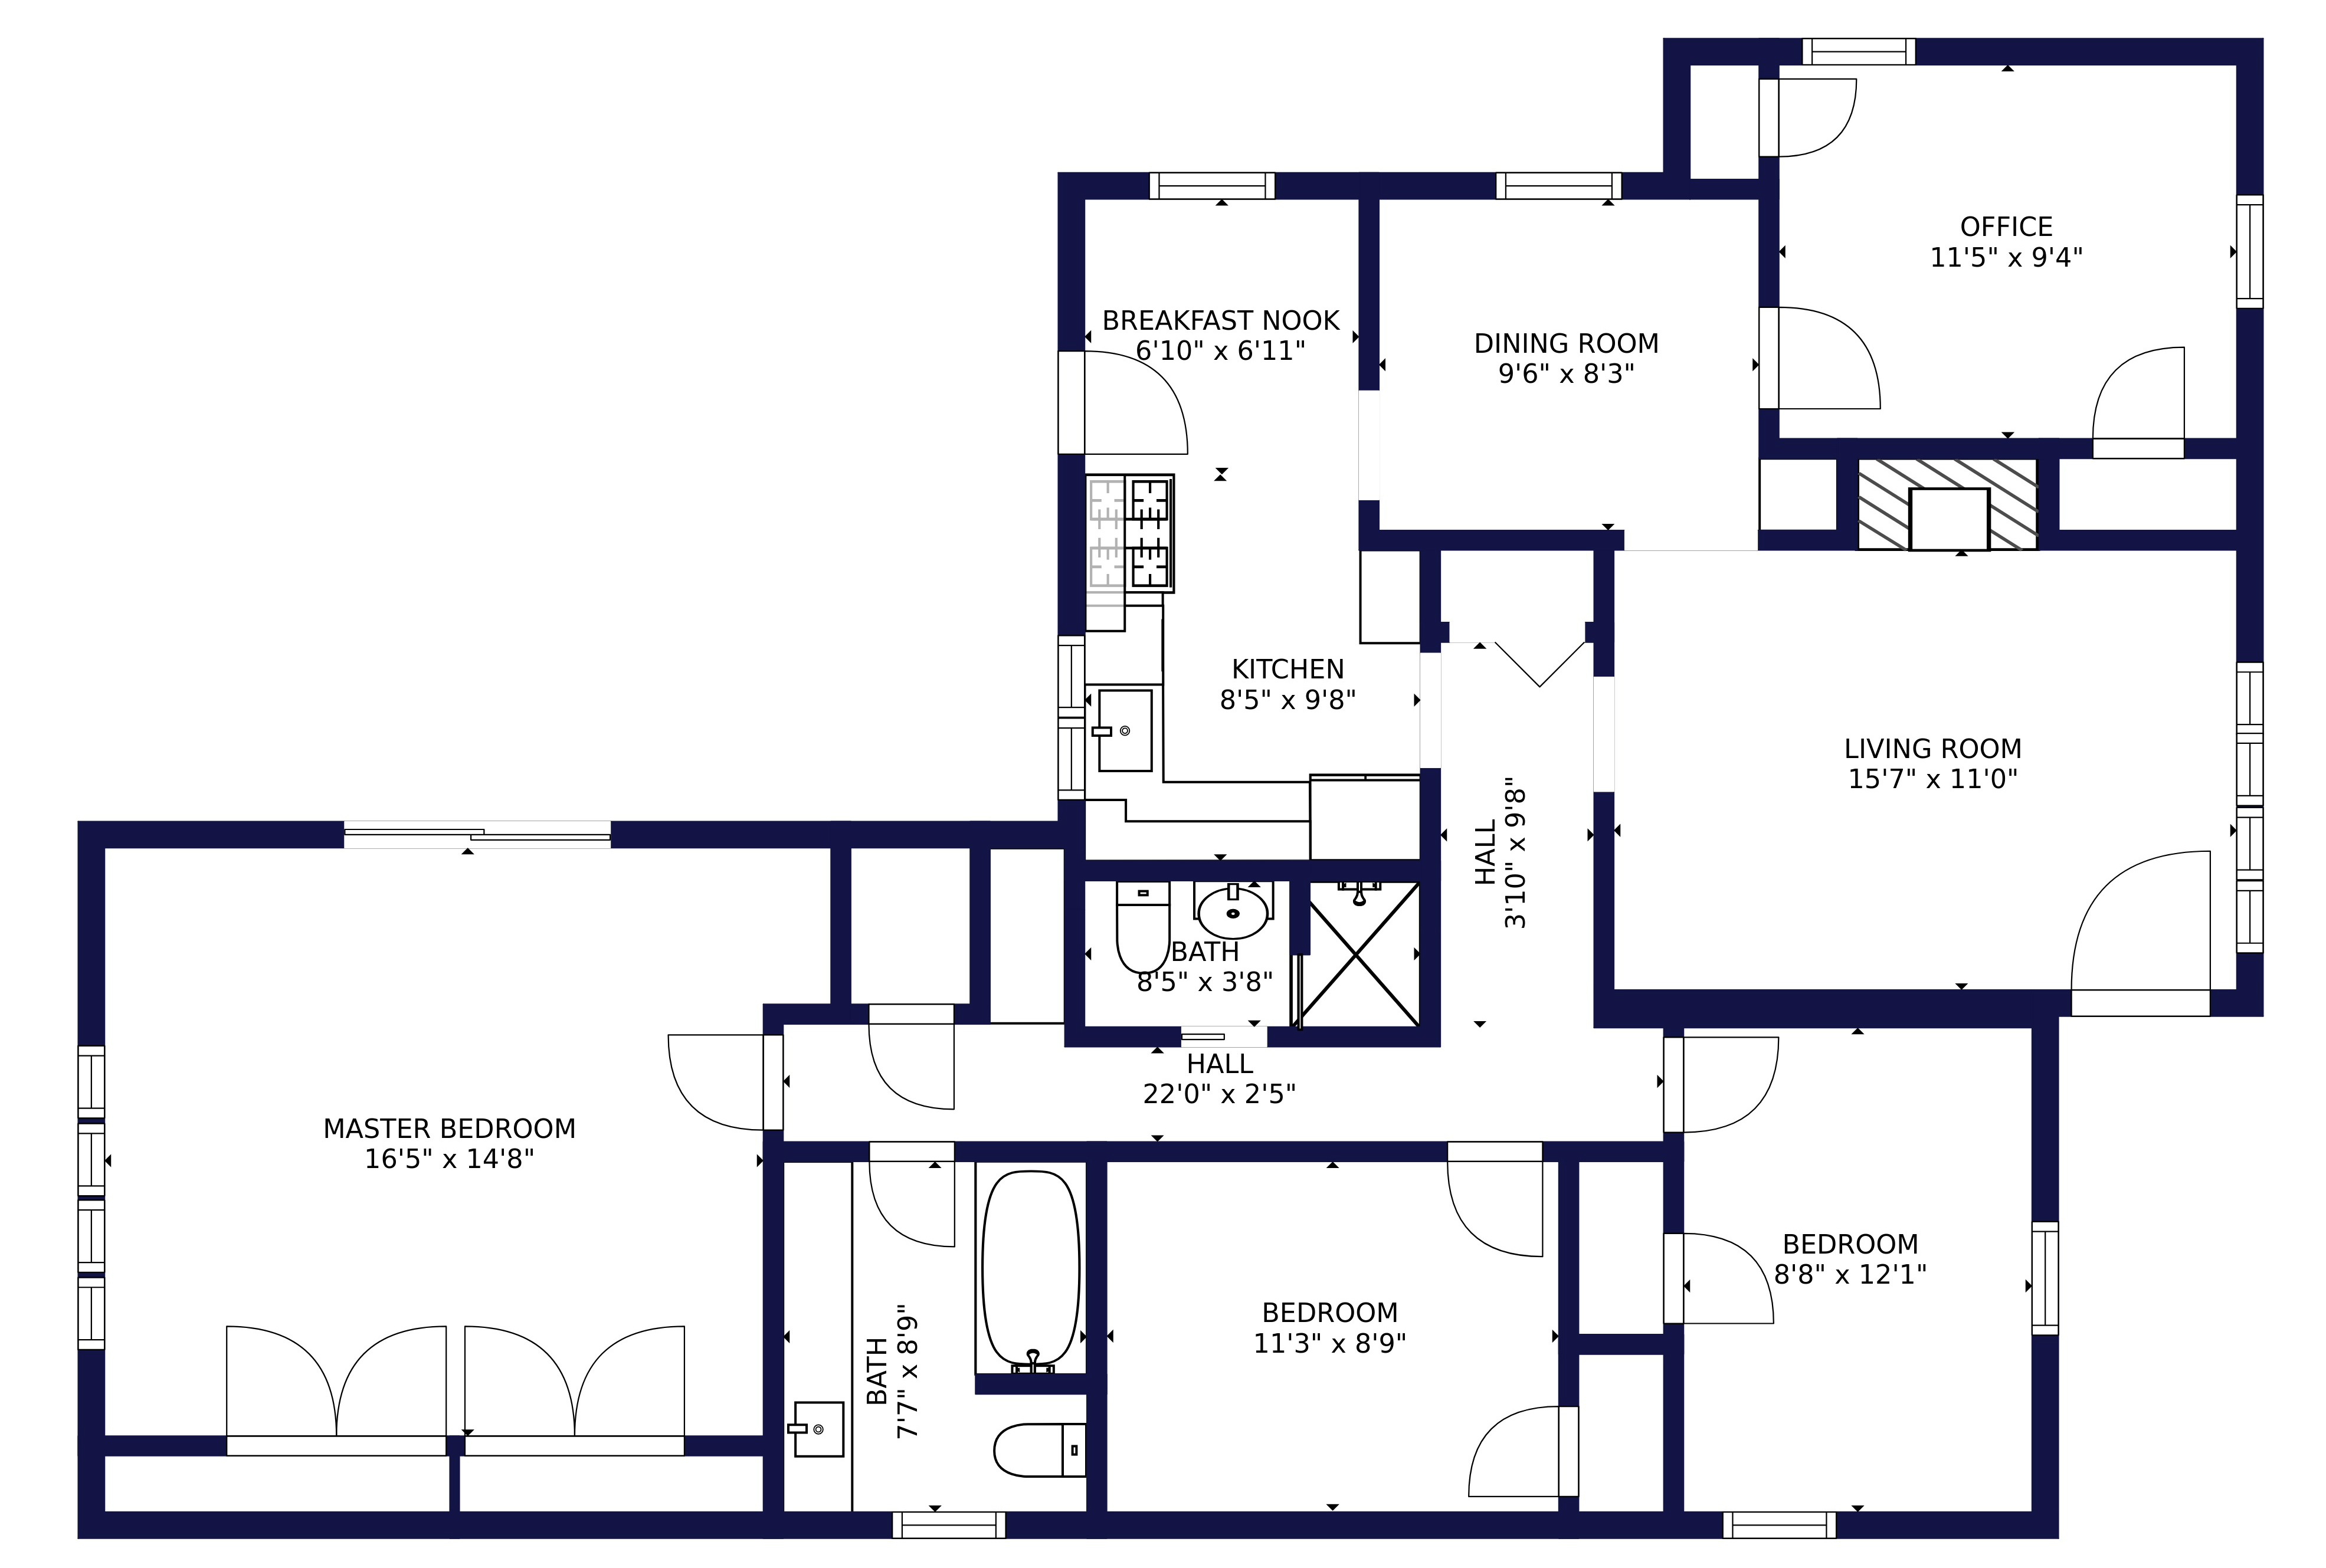 Floor Plan Tours for real estate agents